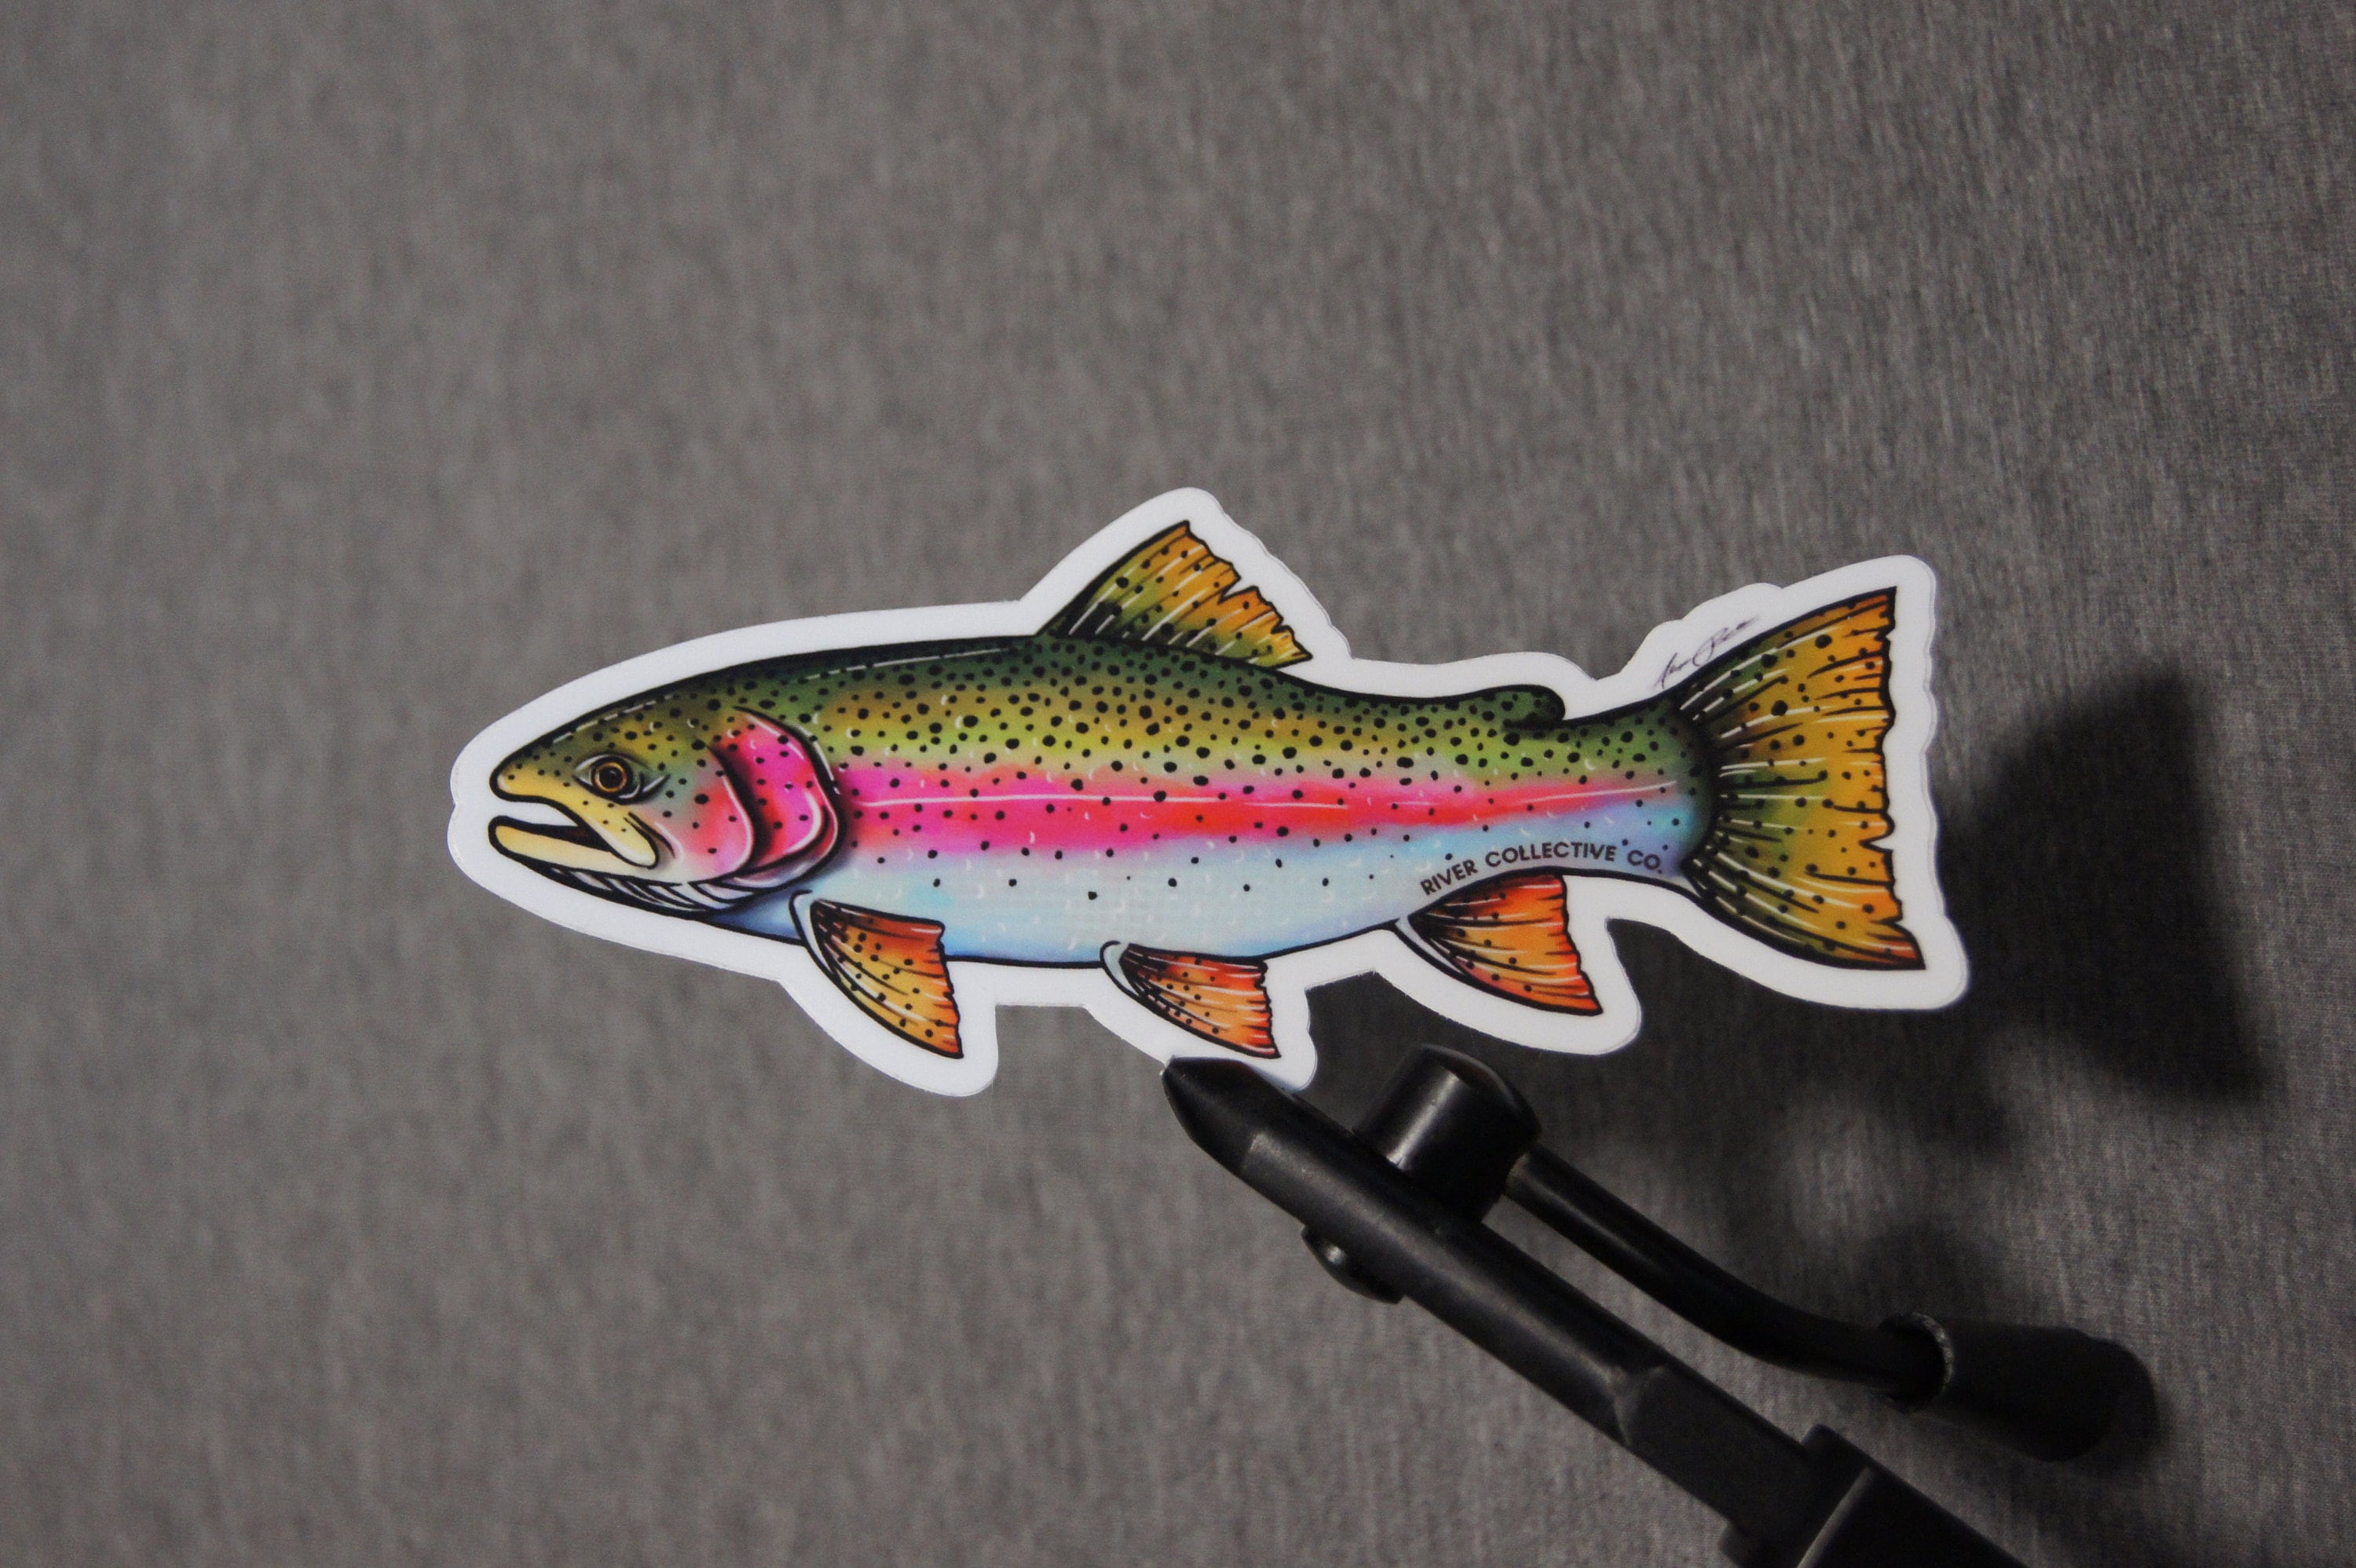 Trout Trees Decal Sticker, Fly Fishing Decal, Fishing Decal,fly Fishing,  Brook Trout Tee, Rainbow Trout, Salmon, Fly Fishing Sticker -  Canada